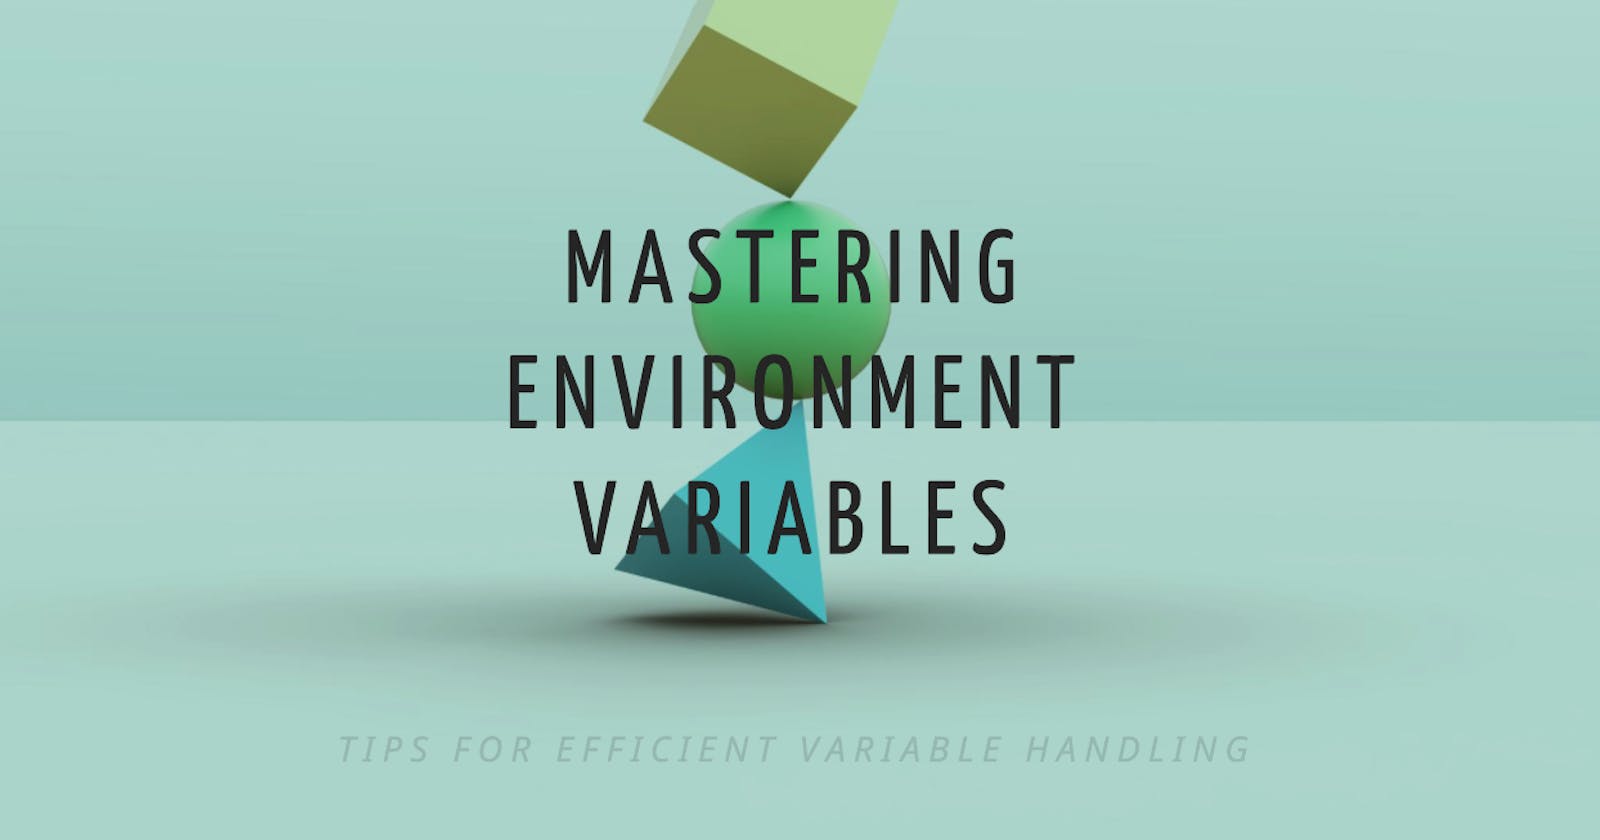 Best way to Handle Environment Variables